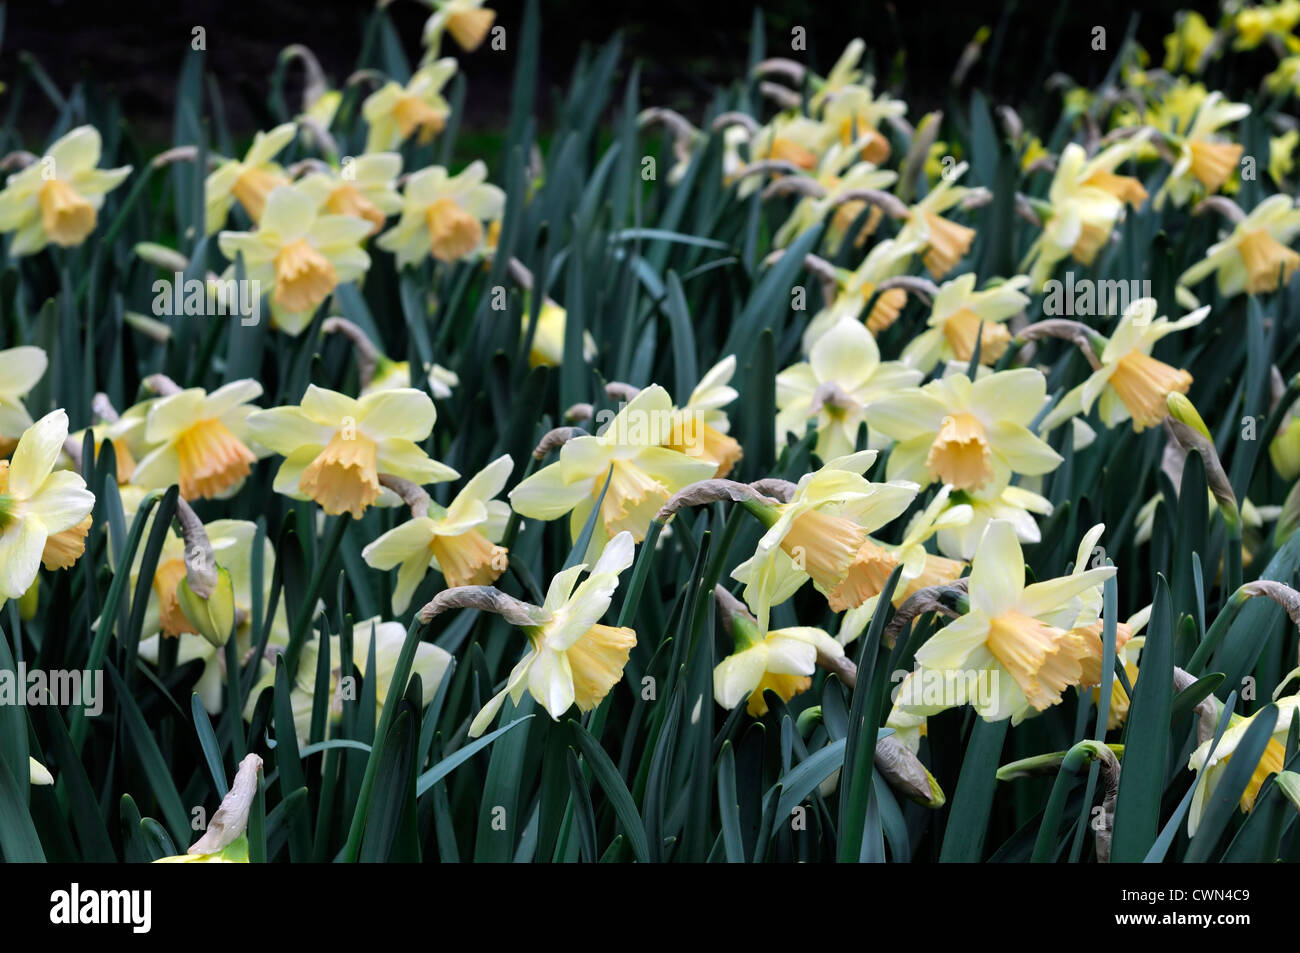 narcissus lorikeet apricot pale yellow trumpet daffodil flowers narcissi daffodils bulbs spring flowering bloom blossom Stock Photo